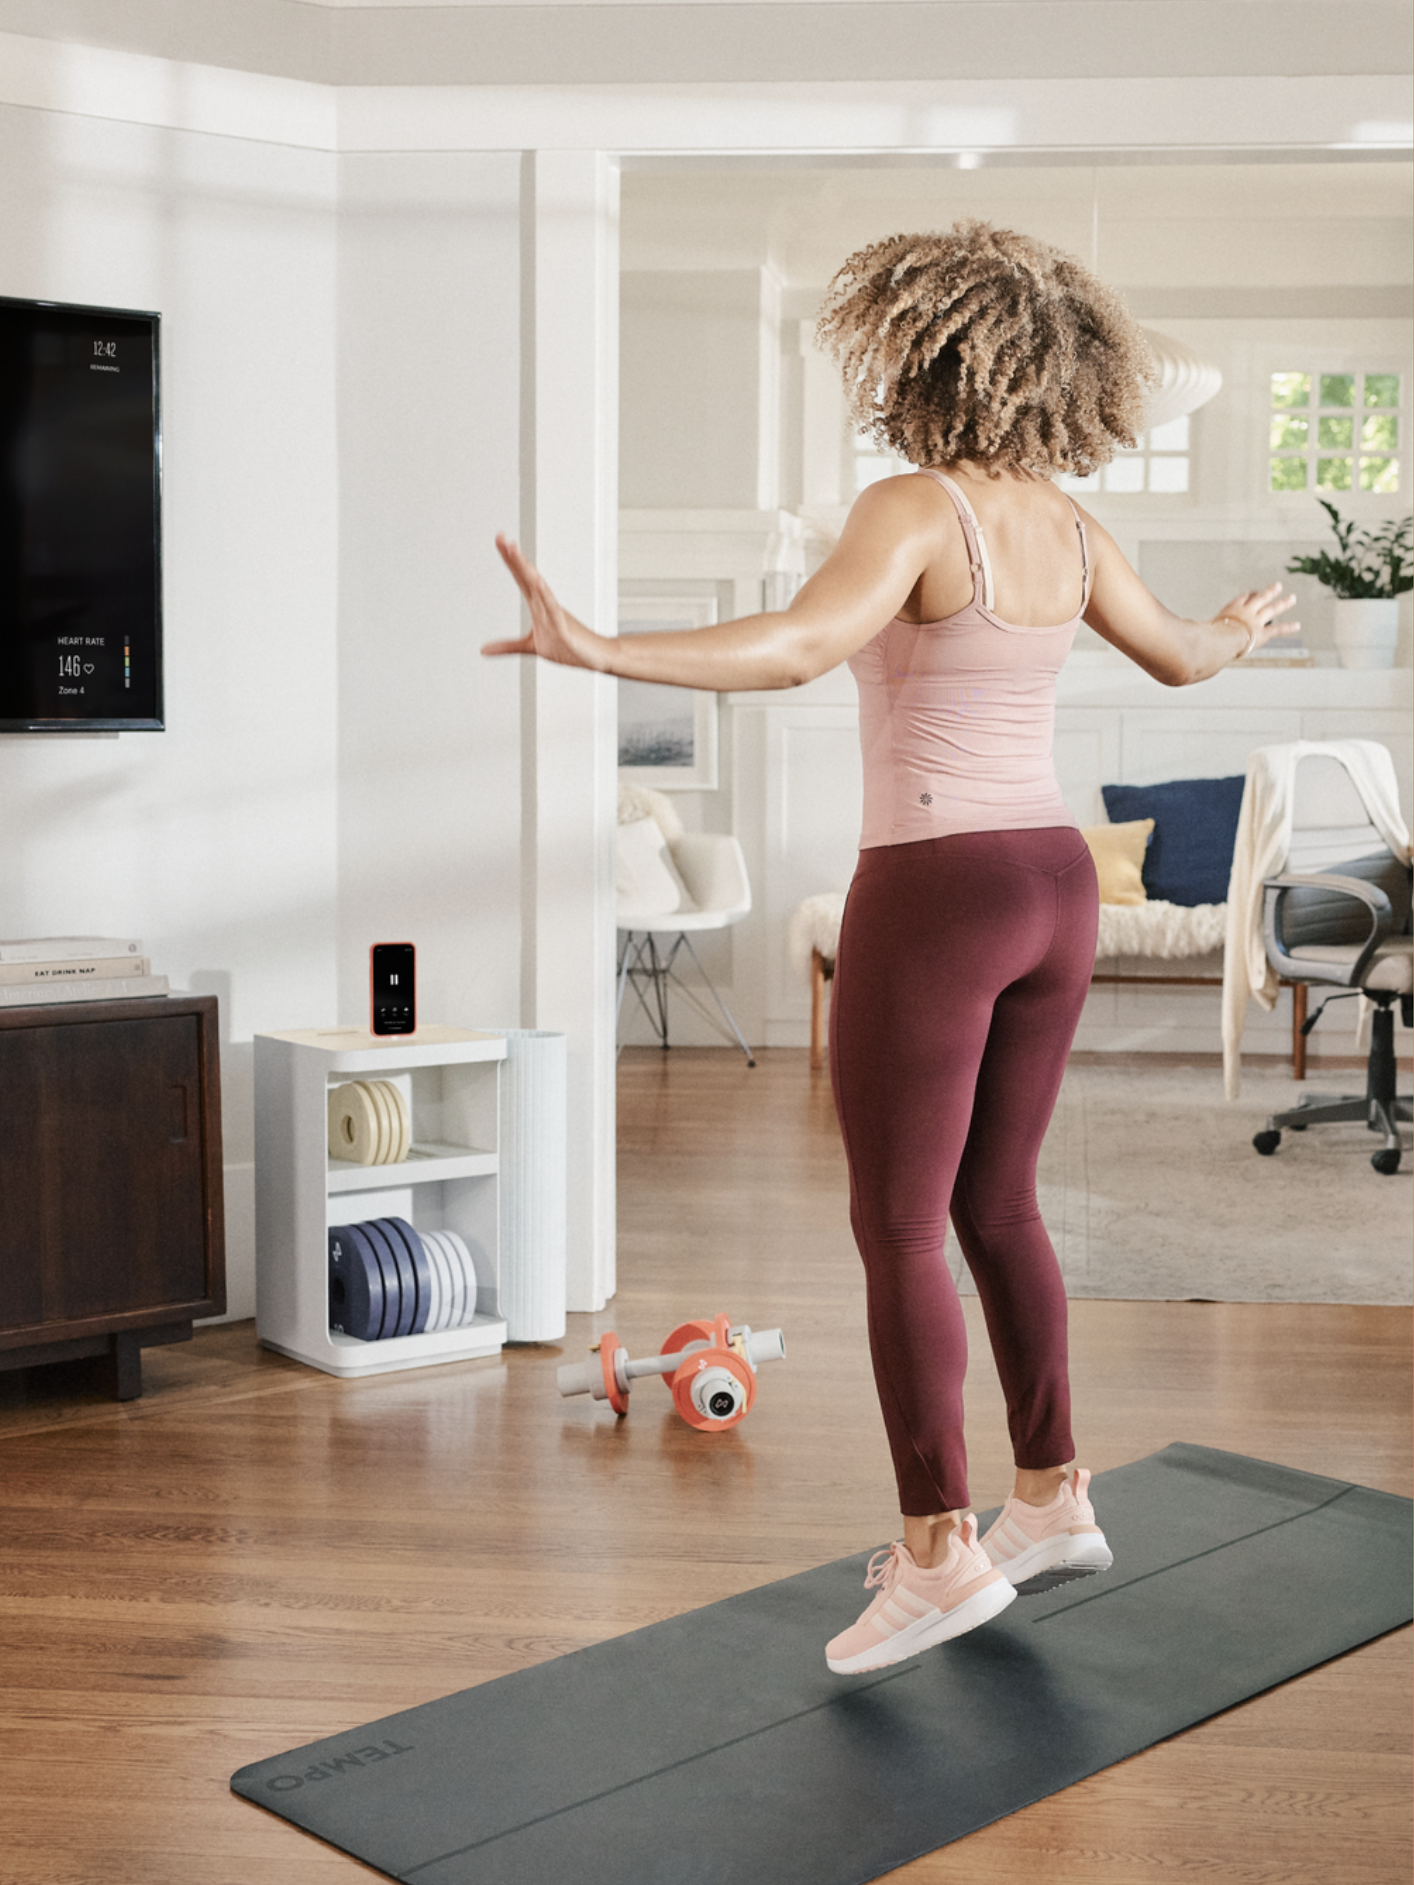 A woman exercising at home while following a workout routine on a television screen, occasionally pausing to use massage guns for muscle recovery.